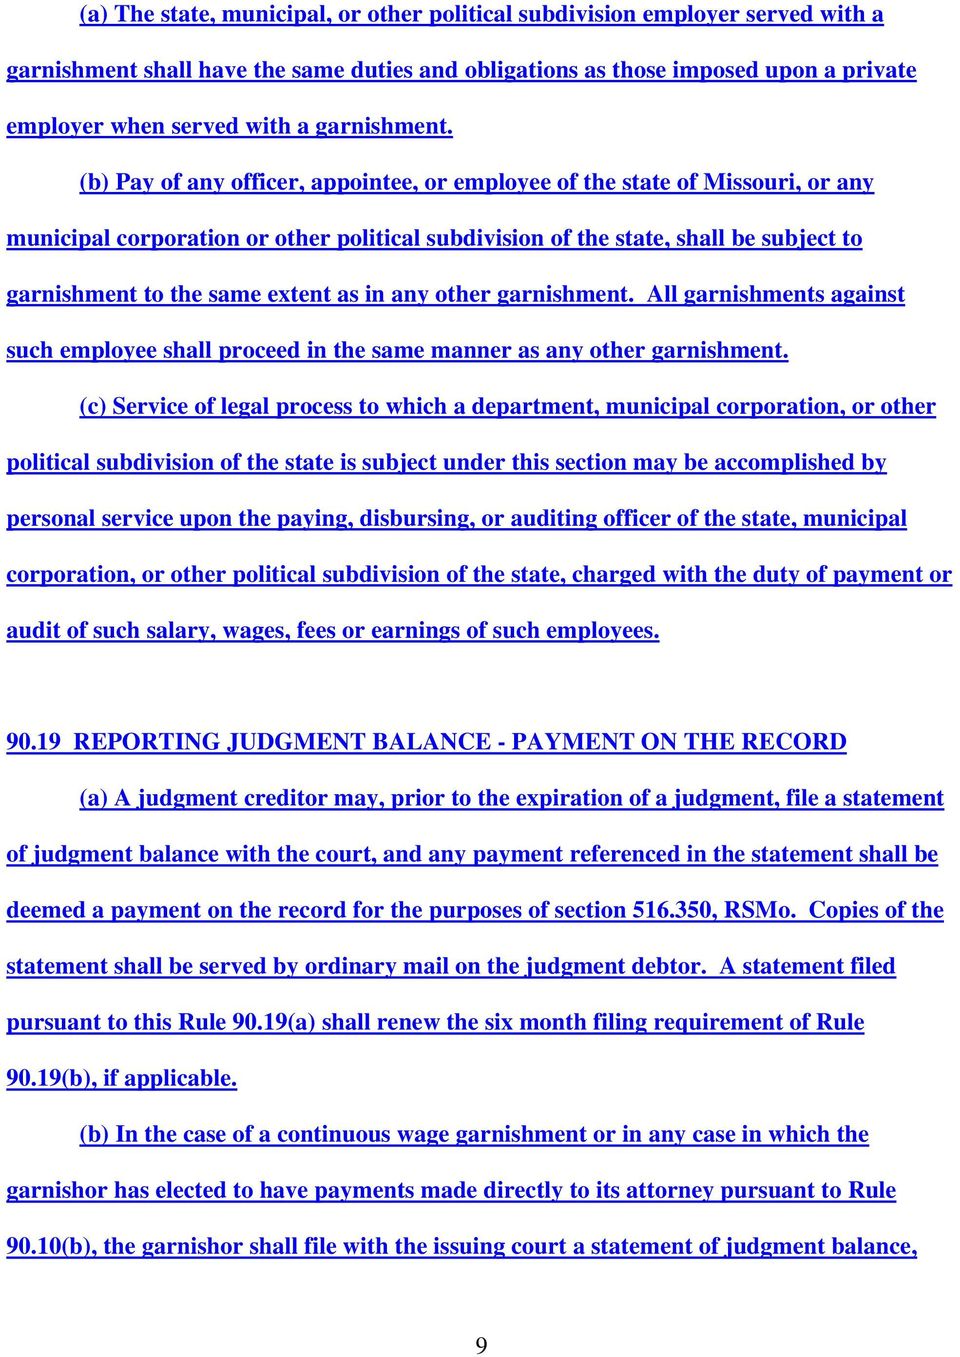 (b) Pay of any officer, appointee, or employee of the state of Missouri, or any municipal corporation or other political subdivision of the state, shall be subject to garnishment to the same extent